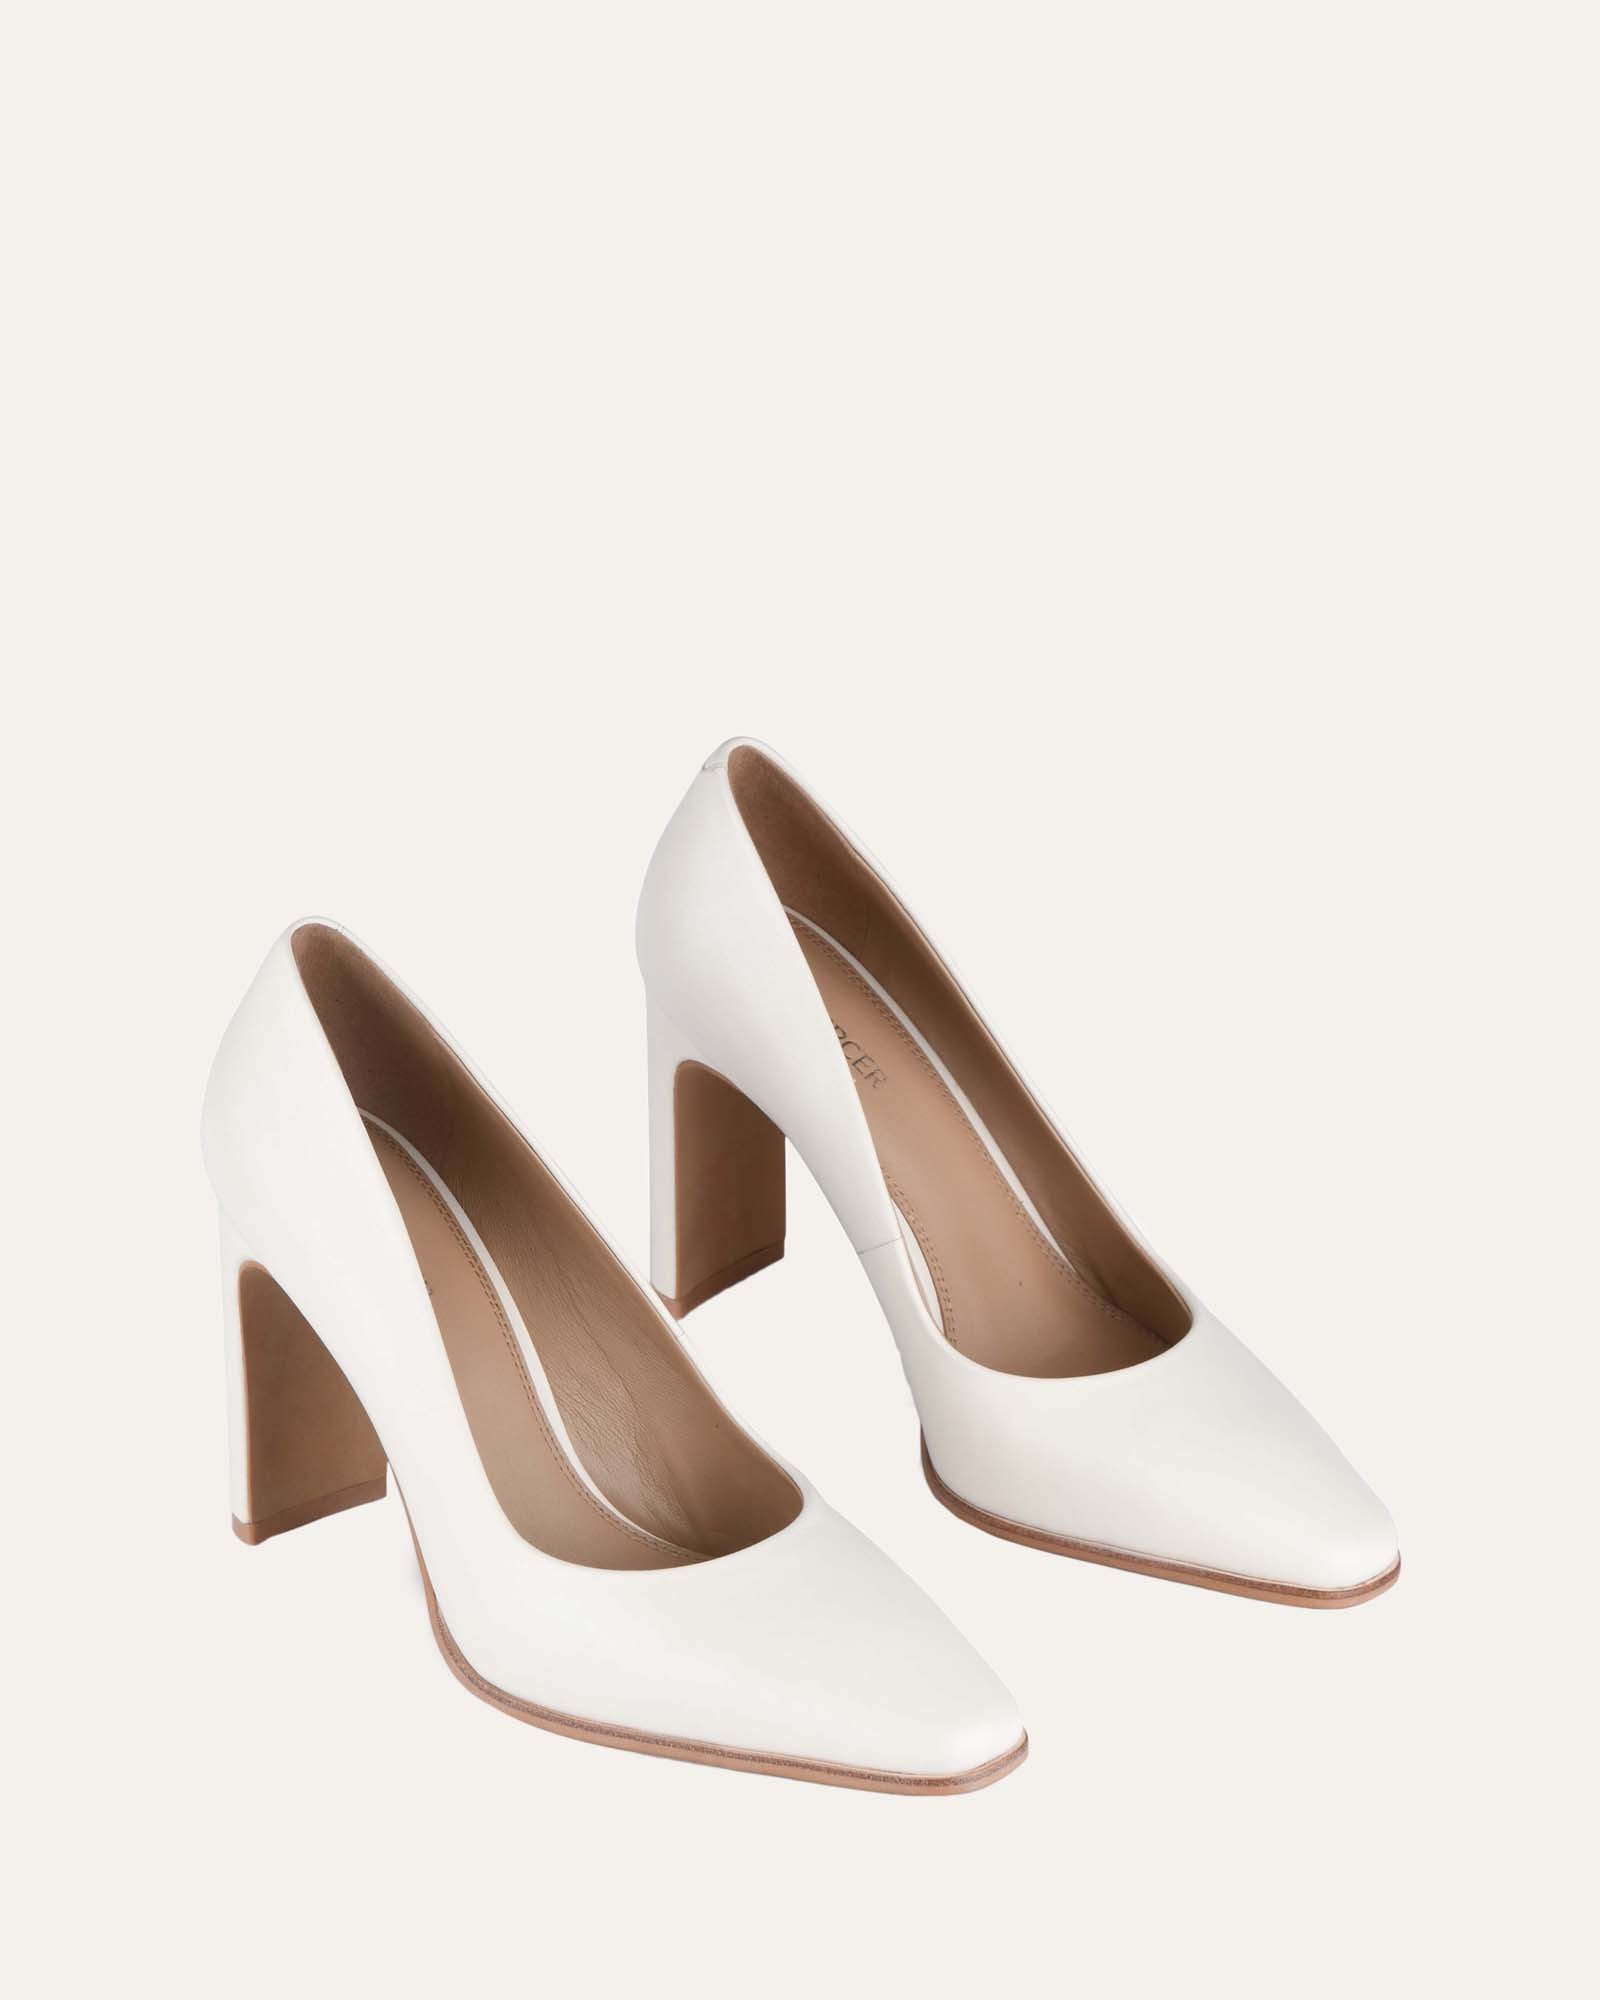 ANOUK - OFF WHITE MIX TAH Shoes | Jimmy choo shoes heels, Jimmy choo shoes,  Jimmy choo women shoes